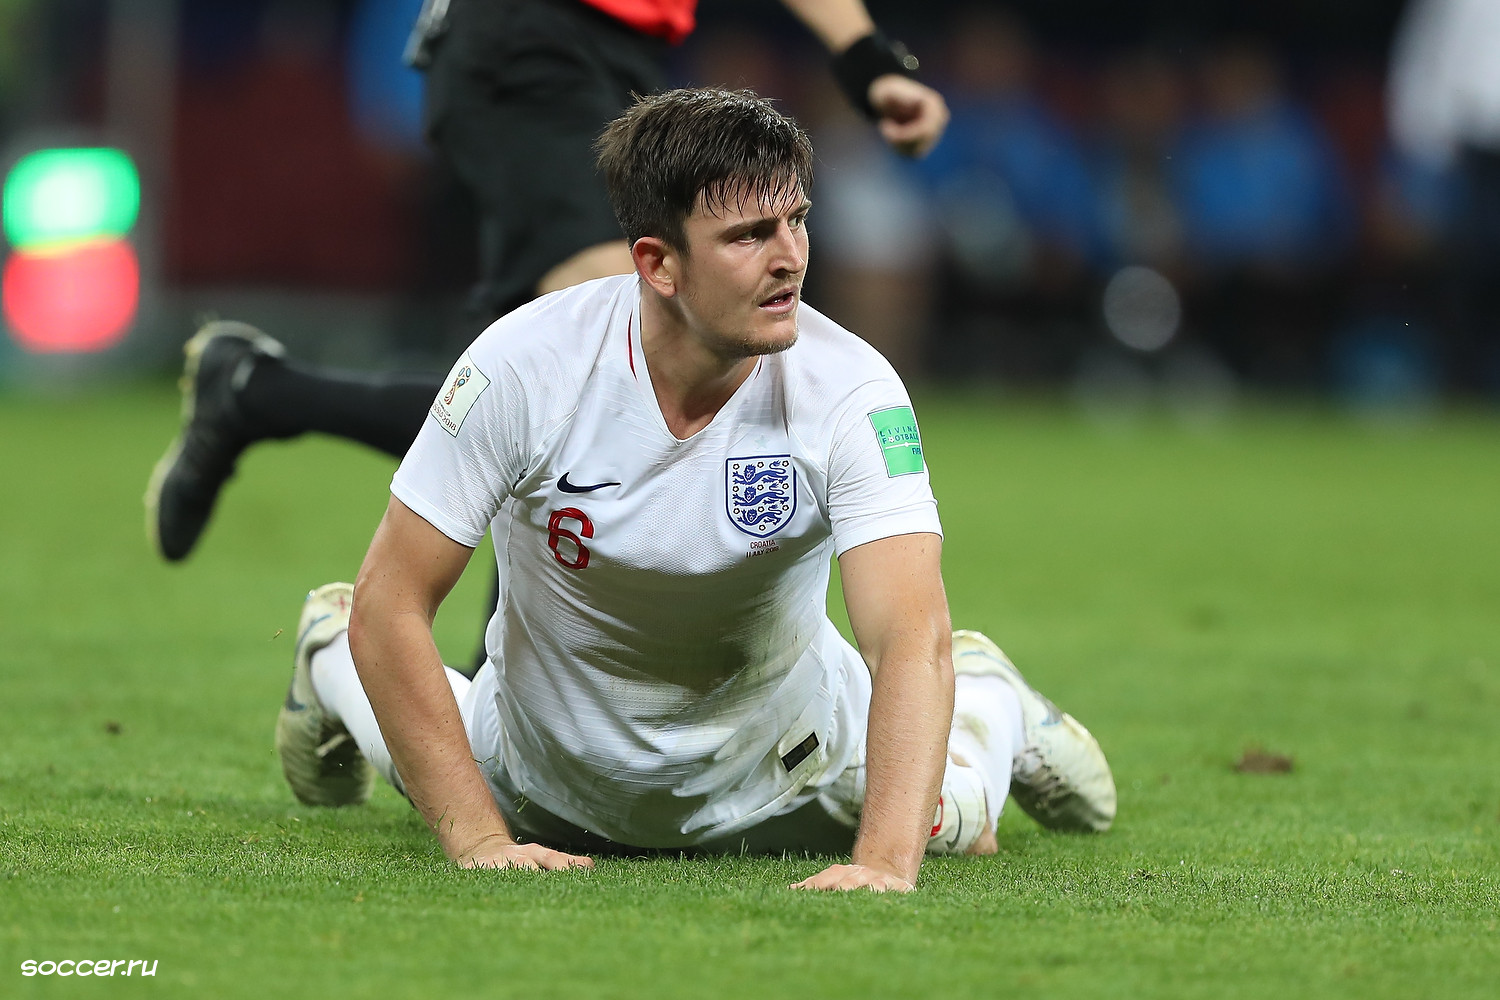 Harry Maguire: The whirlwind assault  case of the Manchester United captain, The Manc